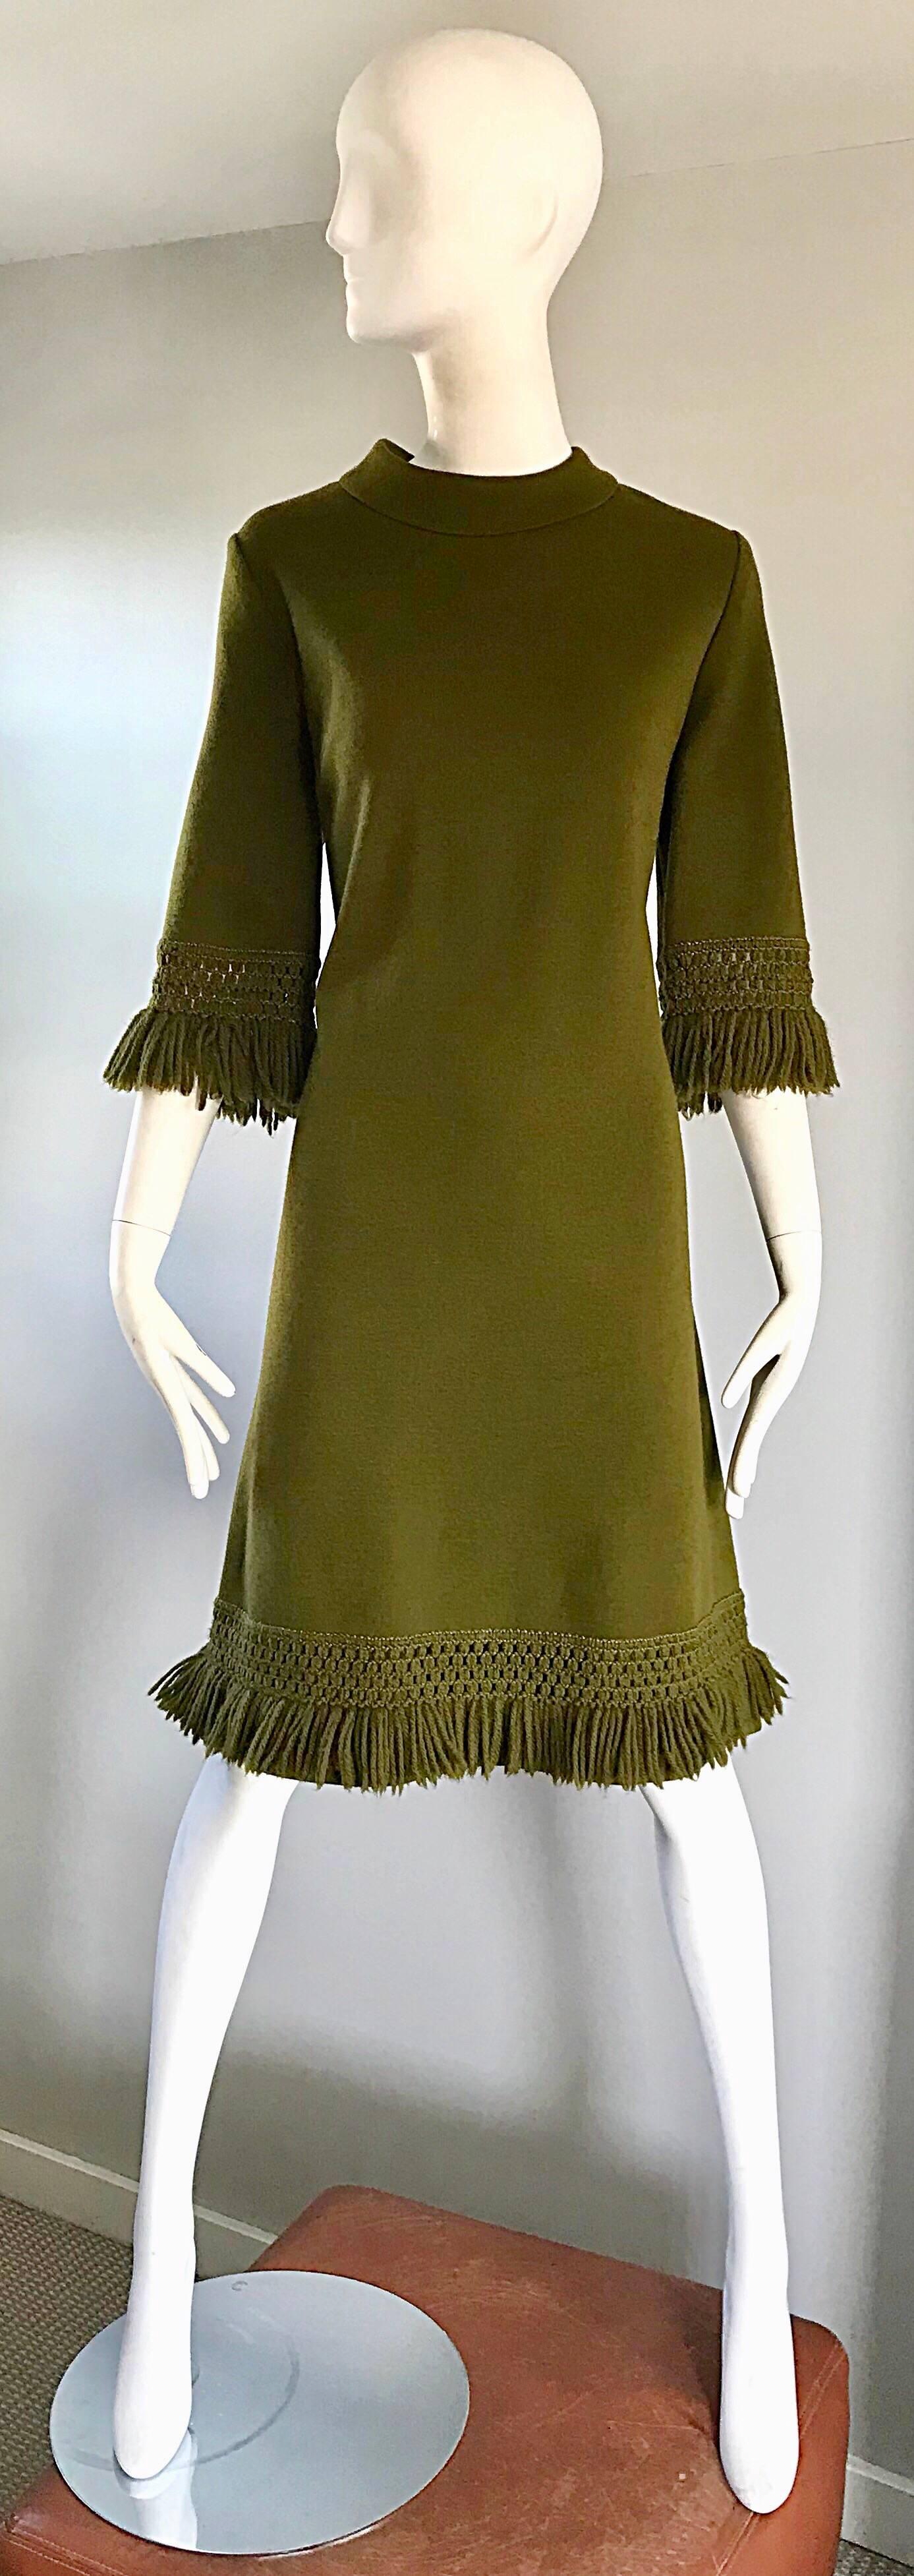 Stylish 1960s hunter green 3/4 sleeve virgin wool fringed A-Line dress! Features a fitted bodice, with a forgiving full skirt. Fringed sleeve cuffs and dress hem. Full metal zipper up the back with hook-and-eye closure. Great alone or belted, with